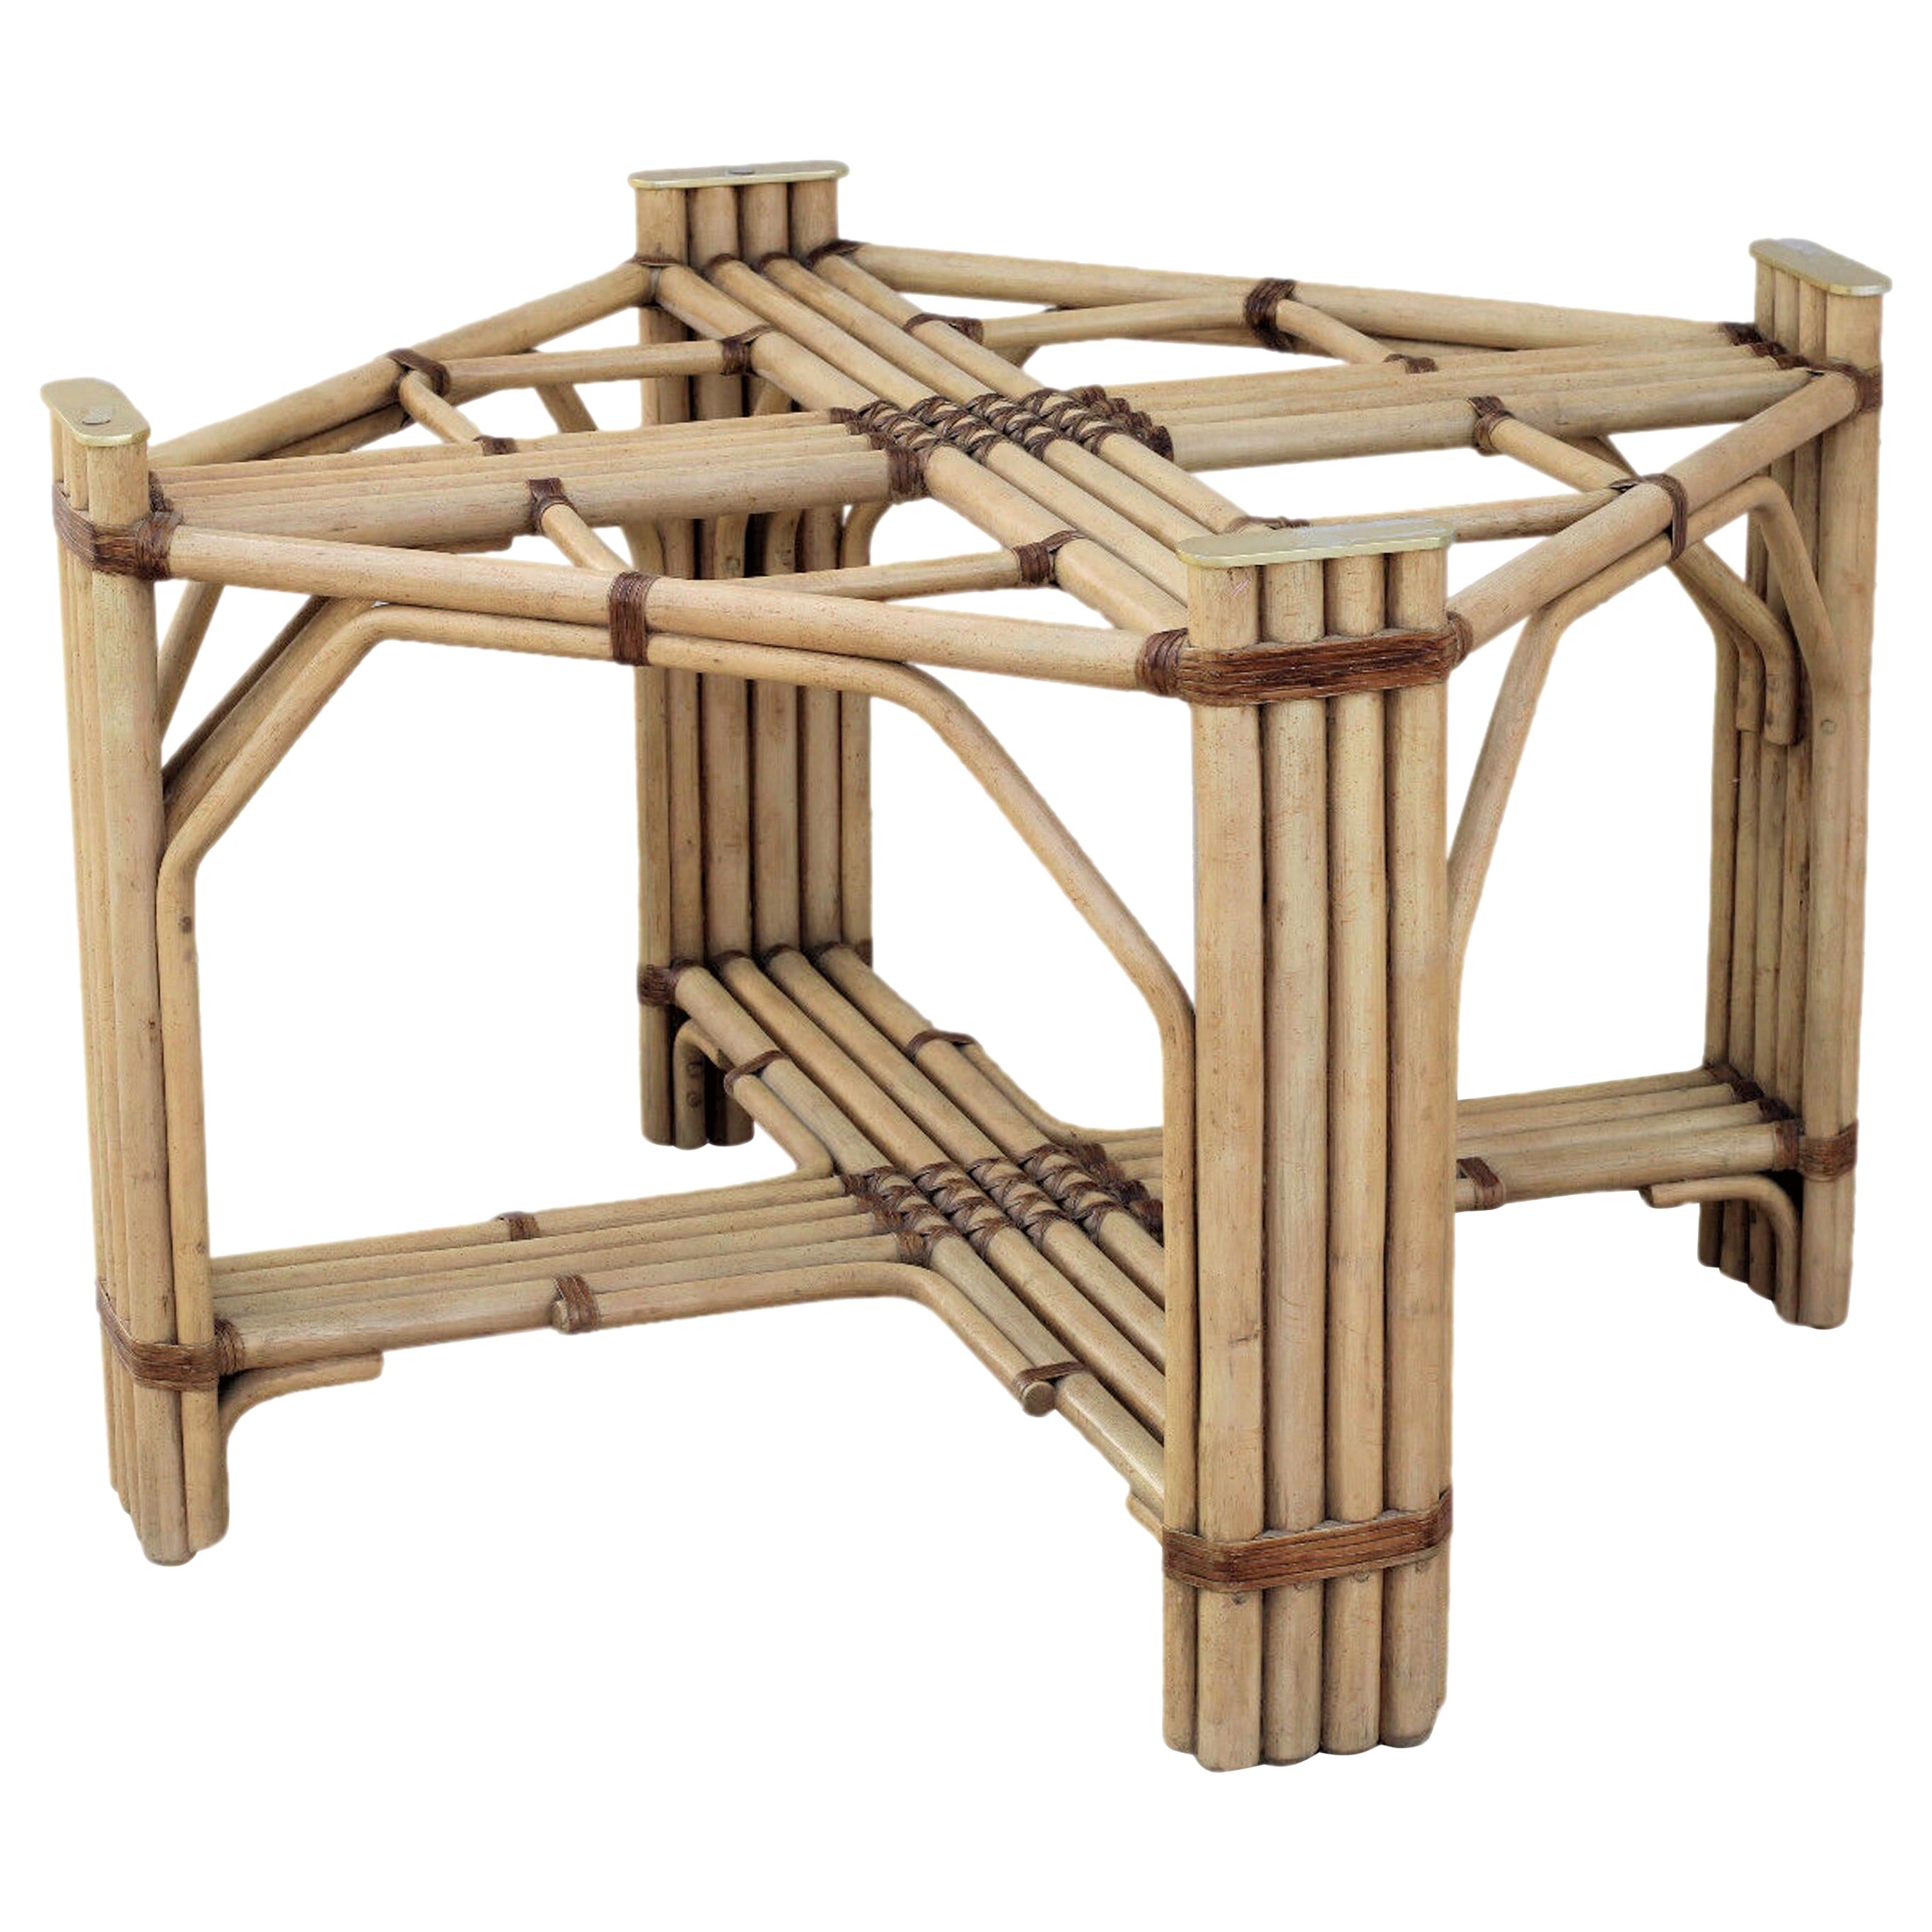 Rattan Bamboo Dining Table Base by Drexel Heritage